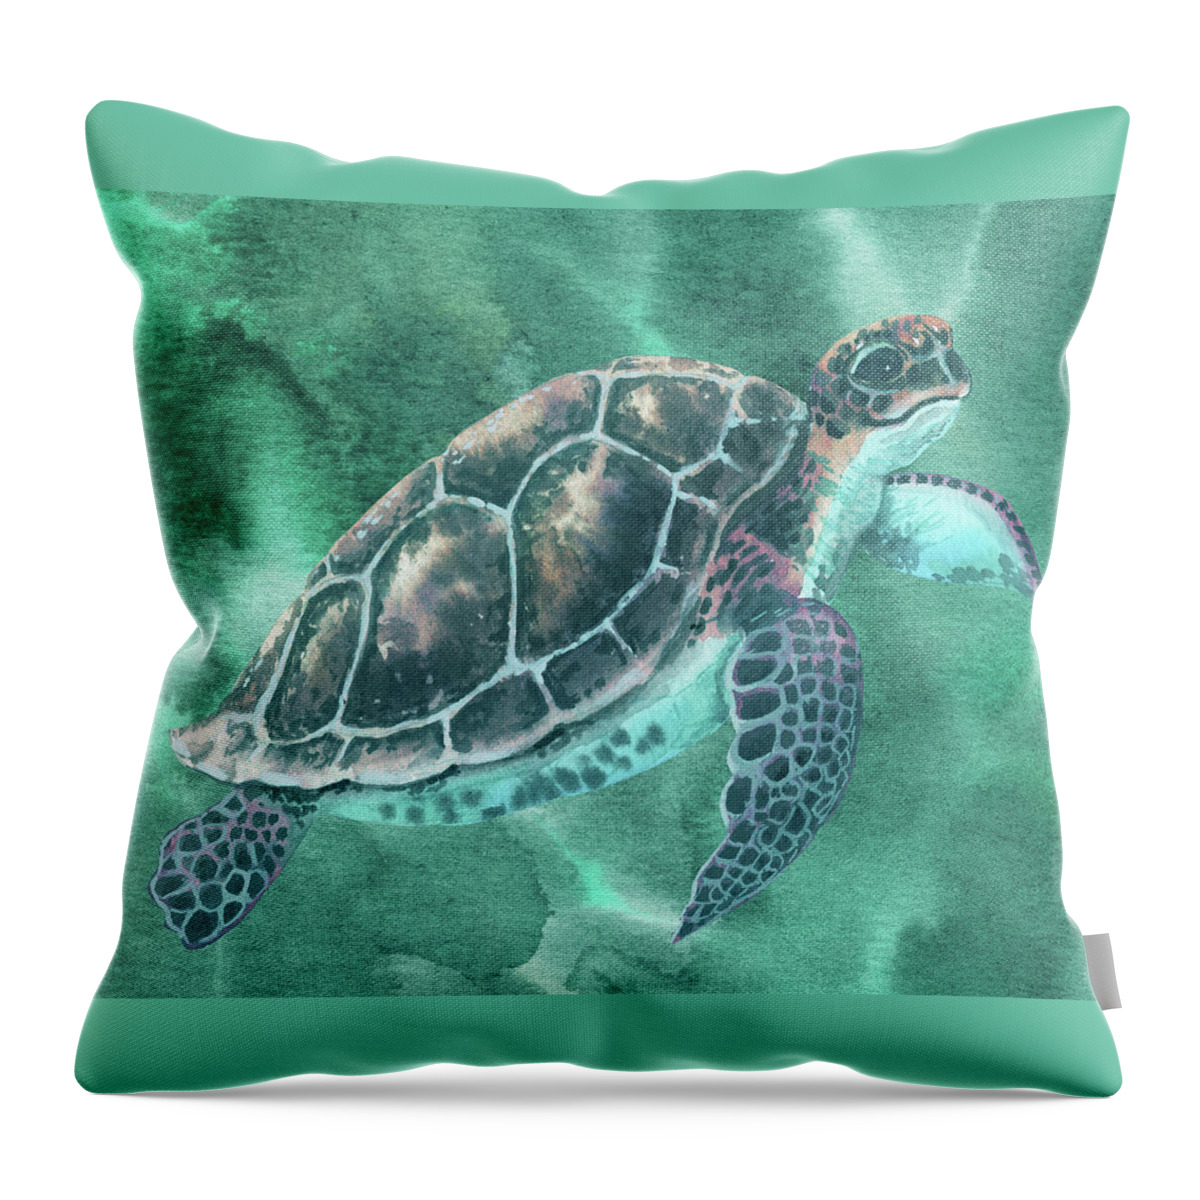 Baby Turtle Throw Pillow featuring the painting Baby Turtle In Teal Blue Green Waters Watercolor by Irina Sztukowski